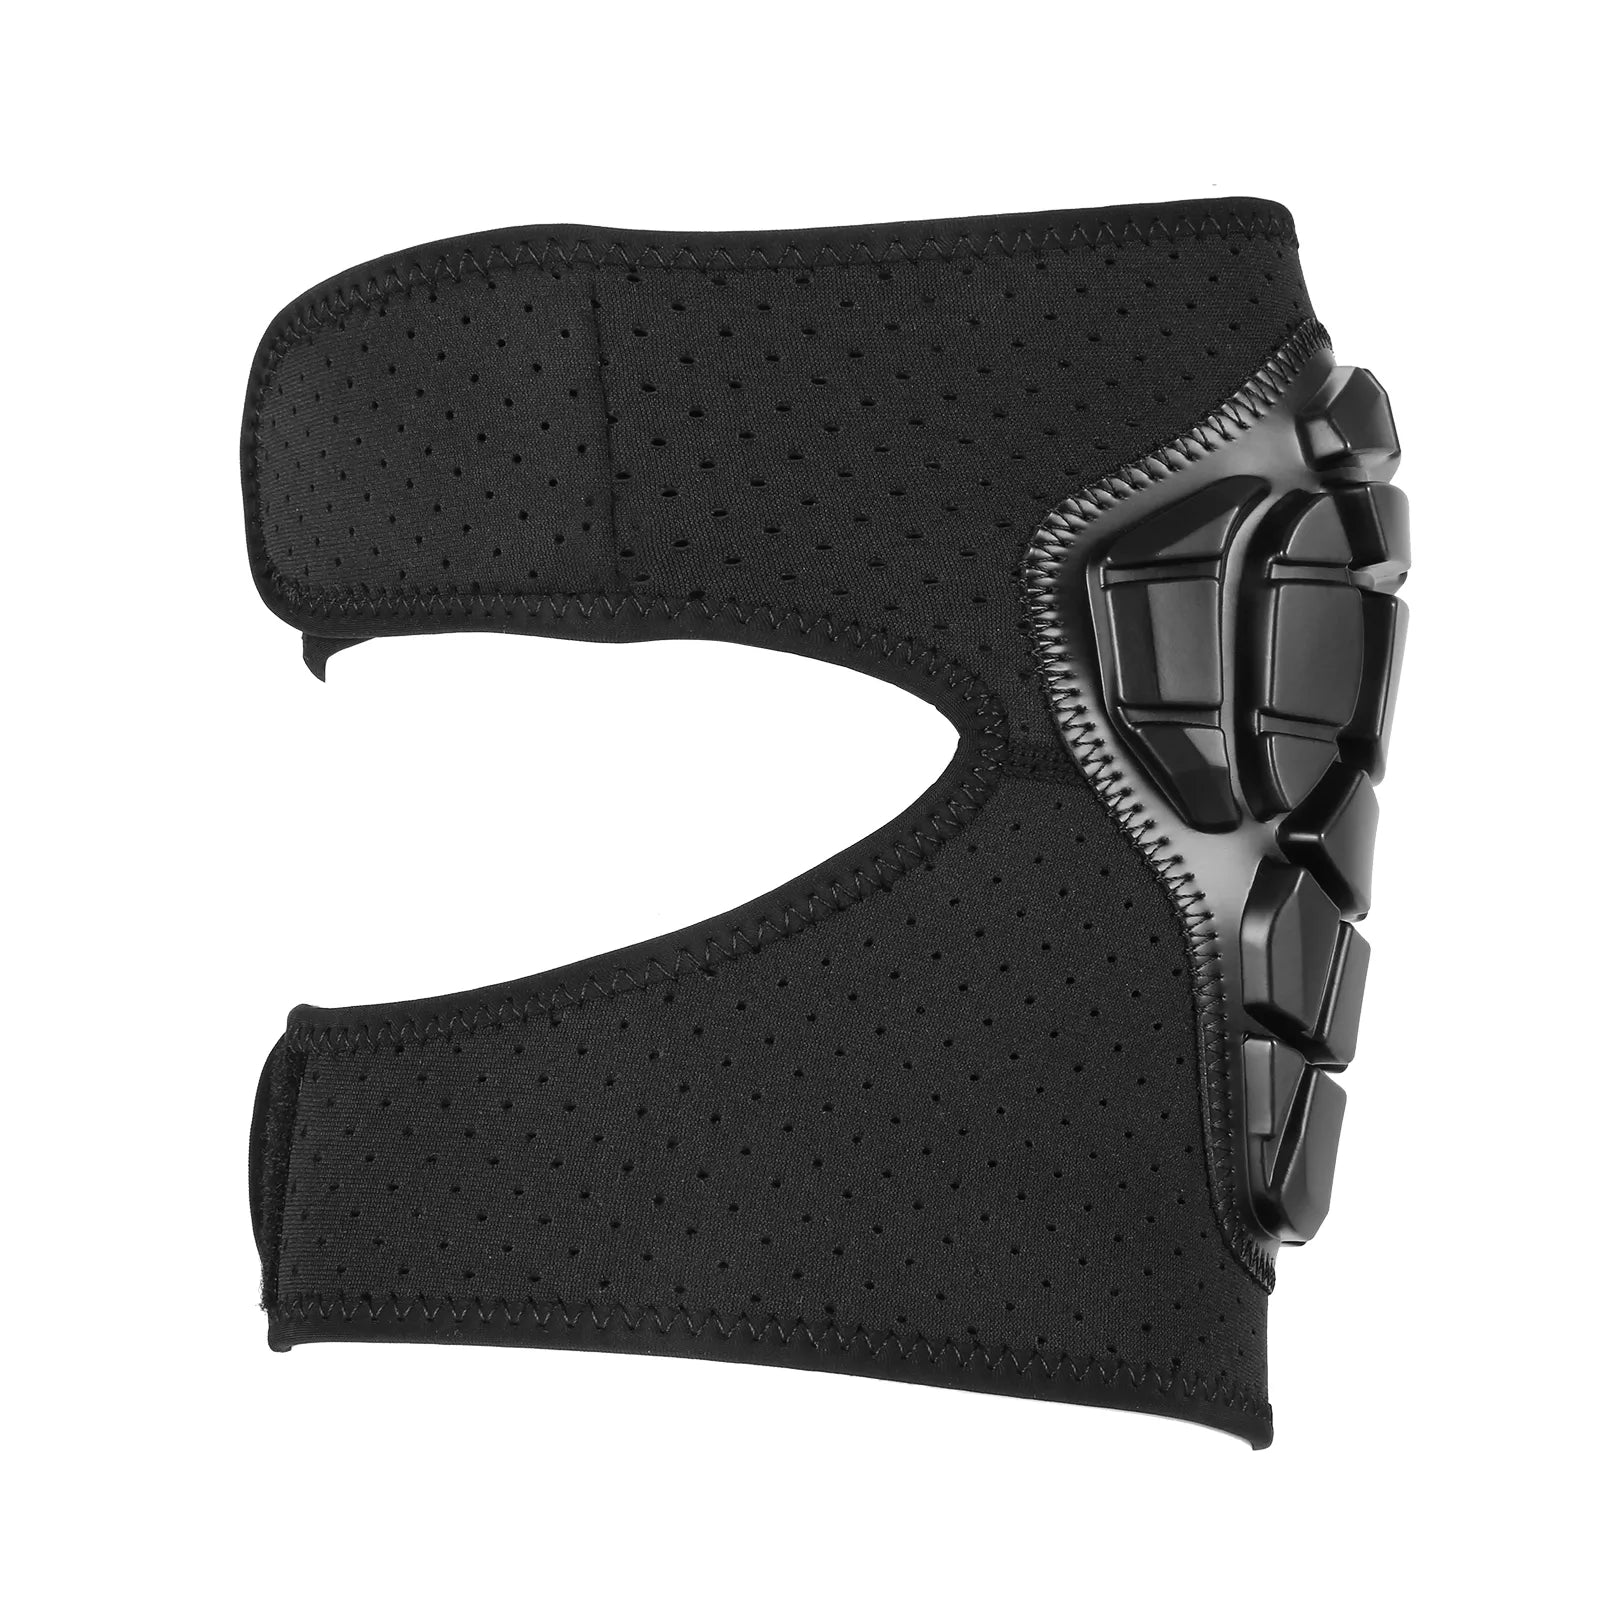 Commuter Electric Bike Professional Anti-Collision Sports Knee Pads enhance riding safety and comfort with honeycomb soft cushioning pads to disperse impact. Made from high-quality diving fabric, they absorb sweat and keep the skin dry. Weighing 0.3 kg, these adjustable knee pads feature double straps to prevent slipping and are constructed from D3O and diving fabric.